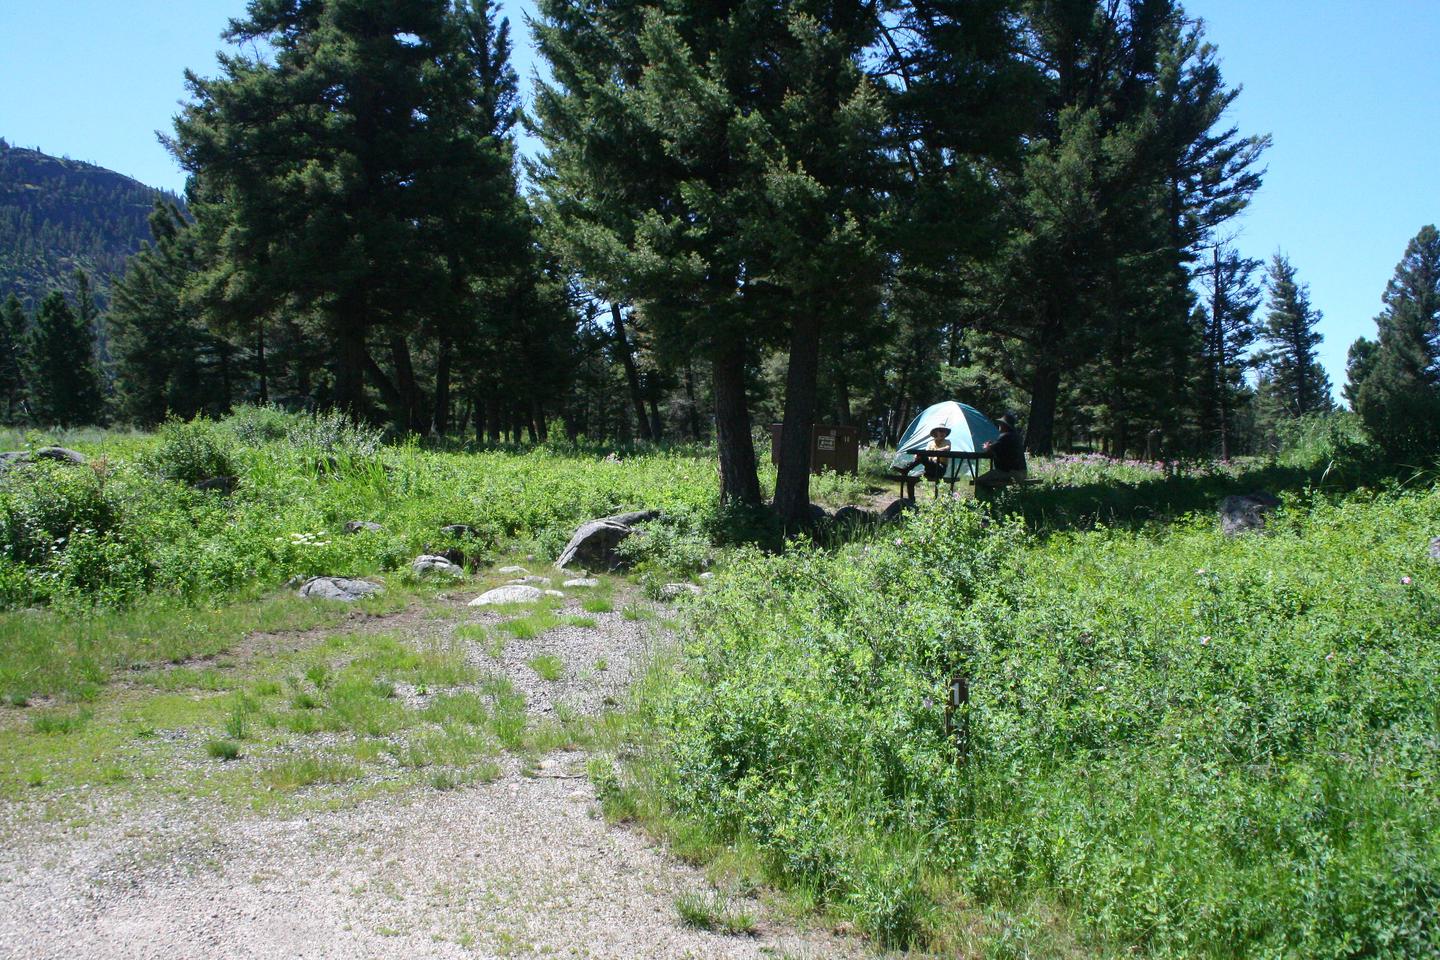 Slough Creek Campground Site #14...Slough Creek Campground Site #14